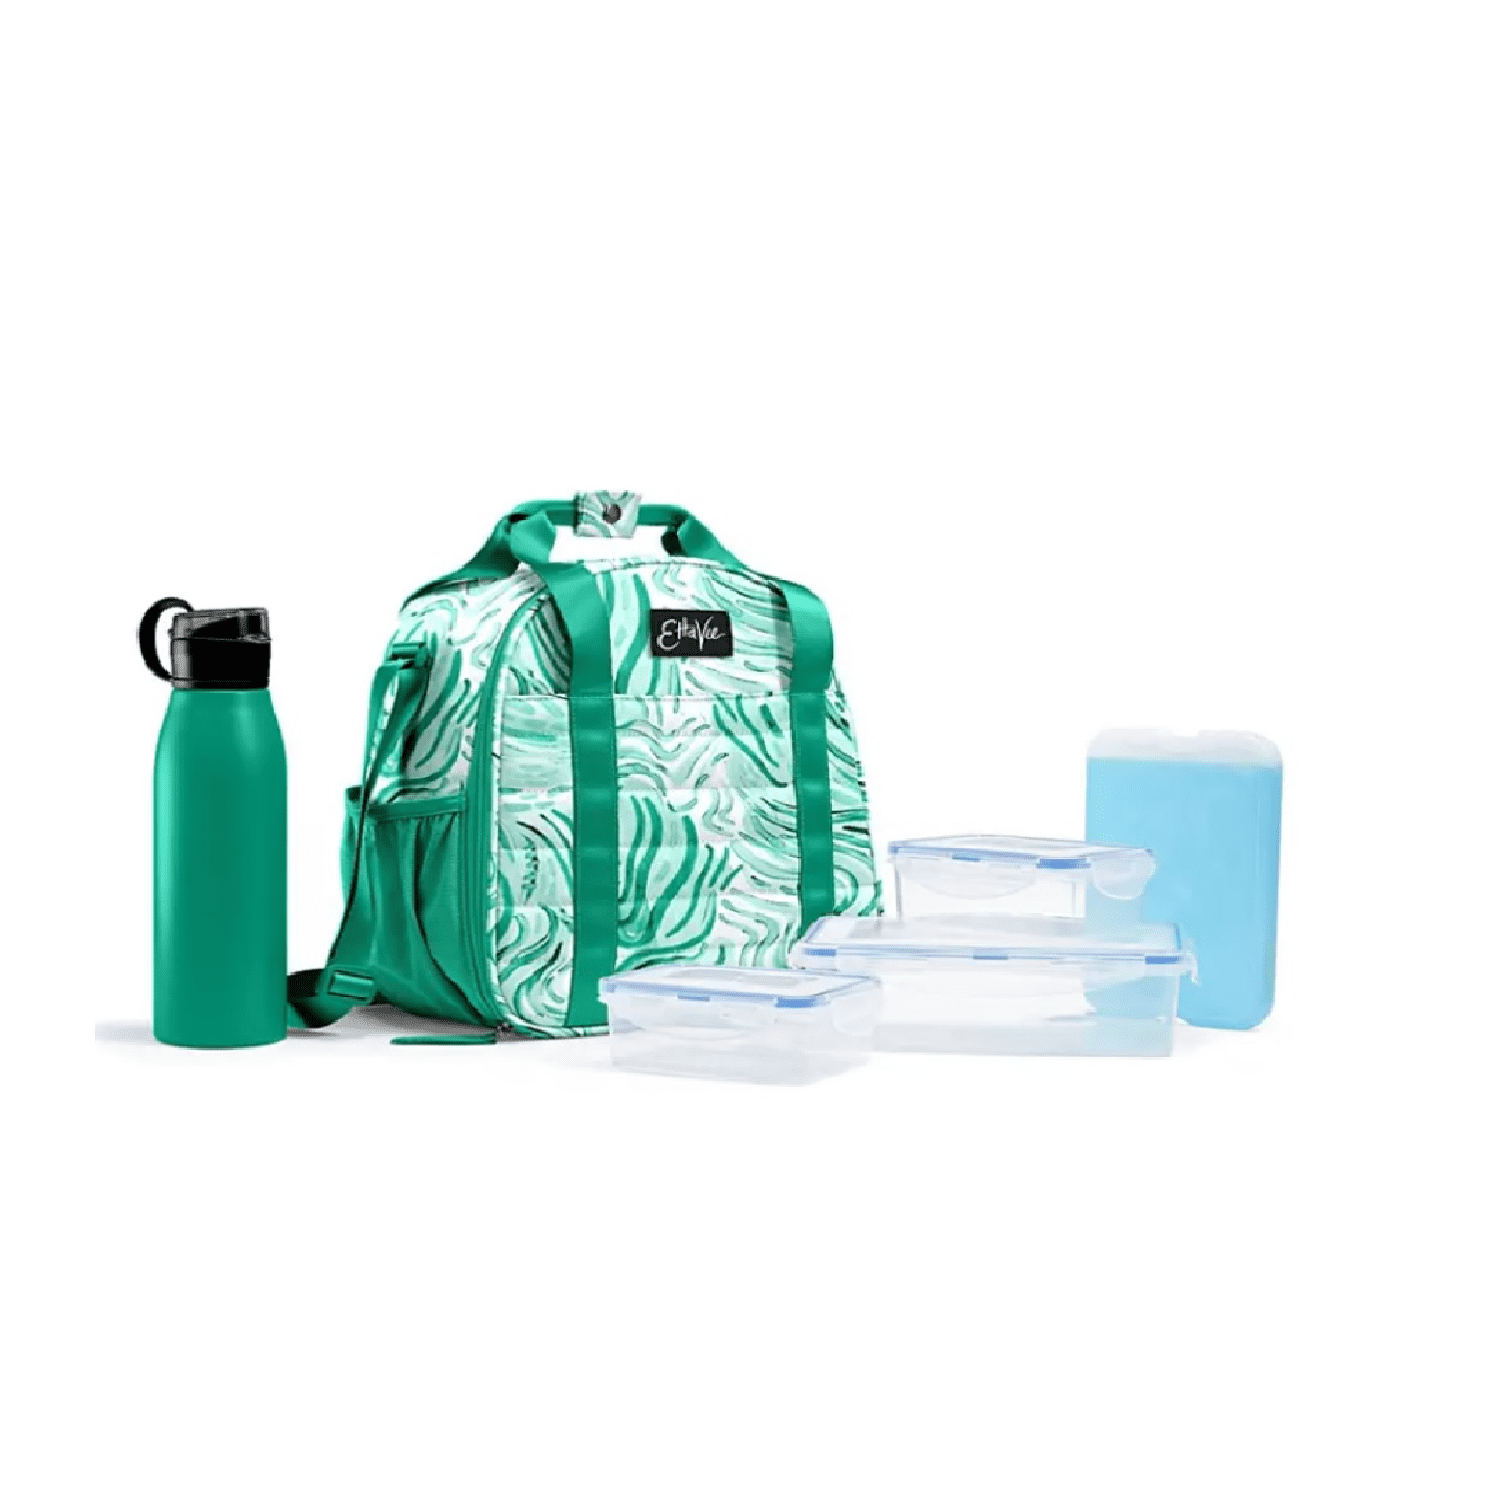 Fit & Fresh Lyon Luxe Lunch Bag With Travel Utensils And Case – Emerald  Green : Target